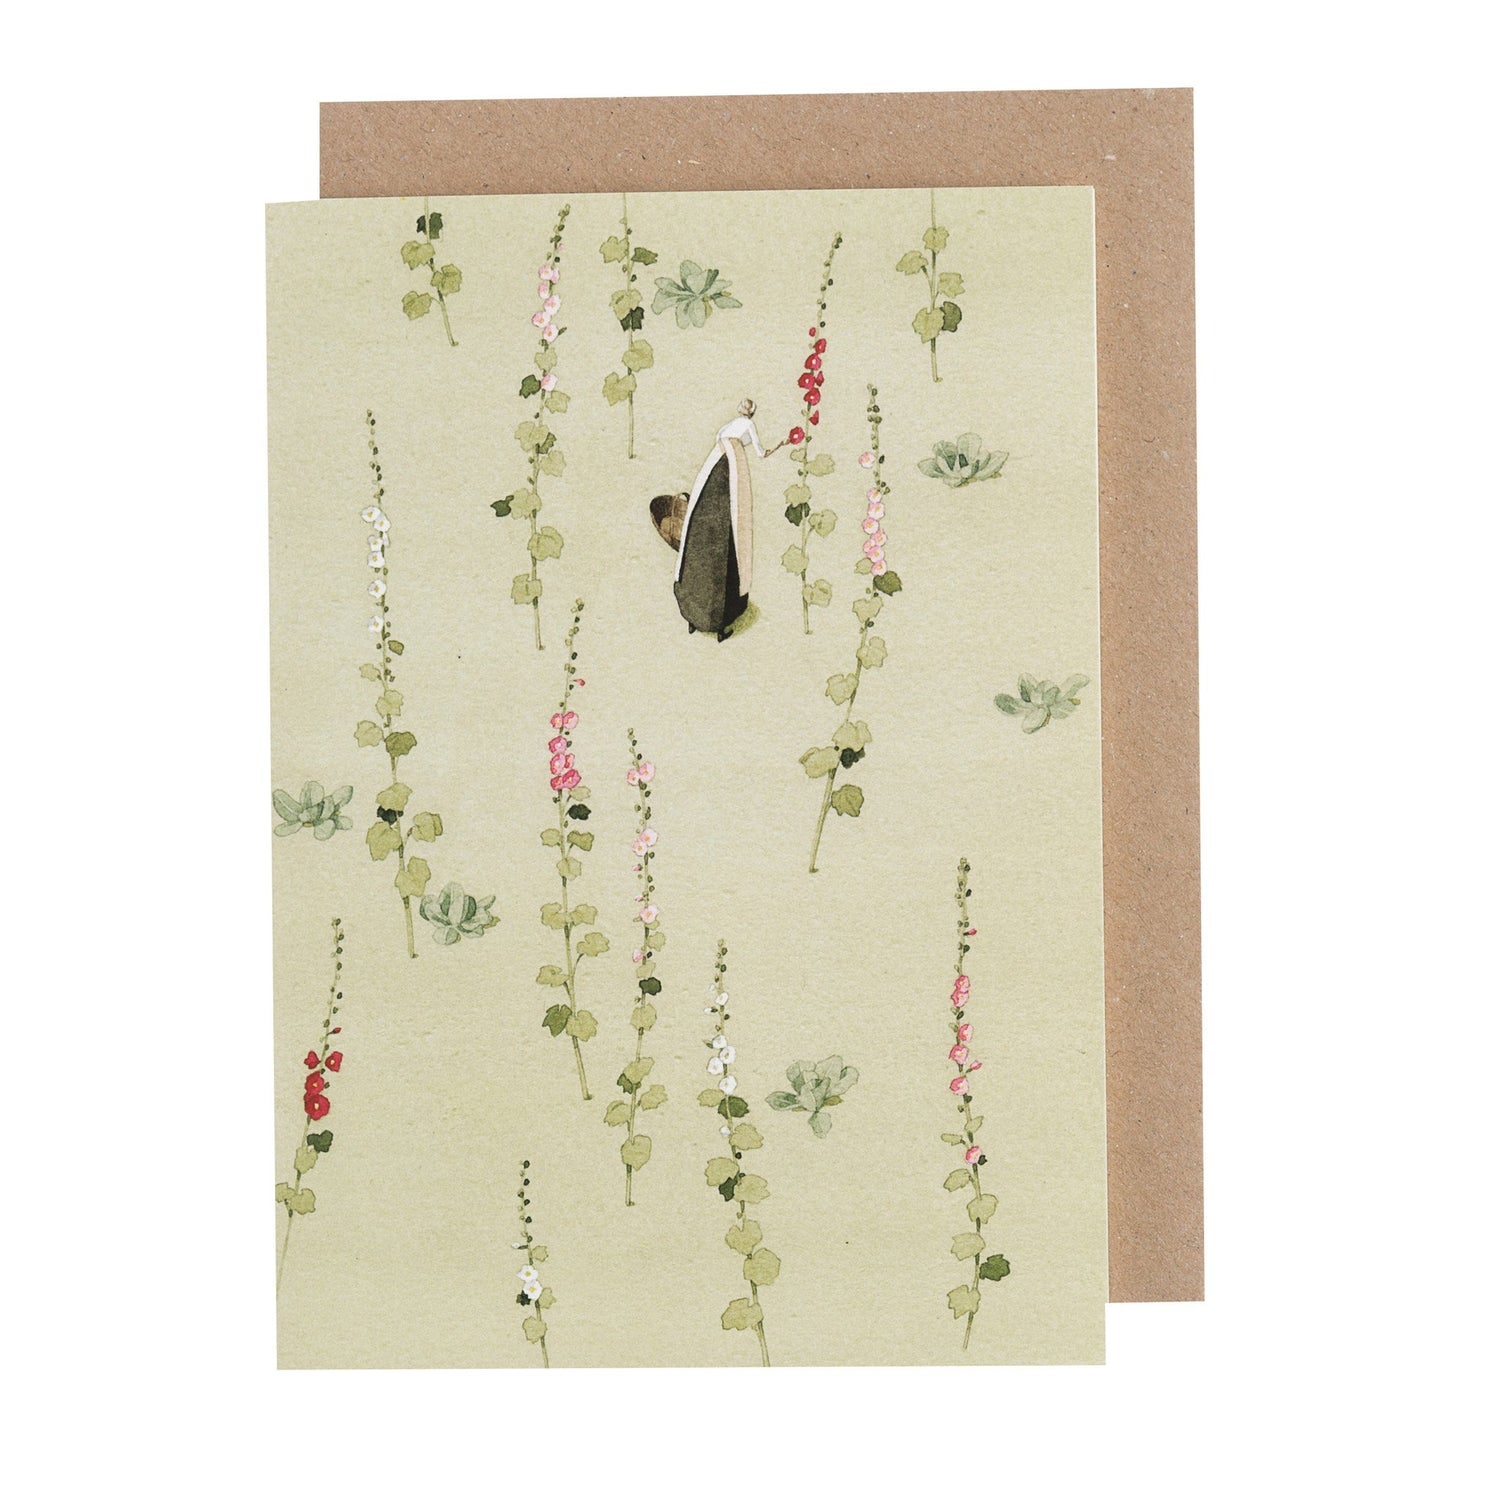 environmentally sustainable paper, compostable packaging, recycled paper, made in england, illustration, hollyhocks, flowers